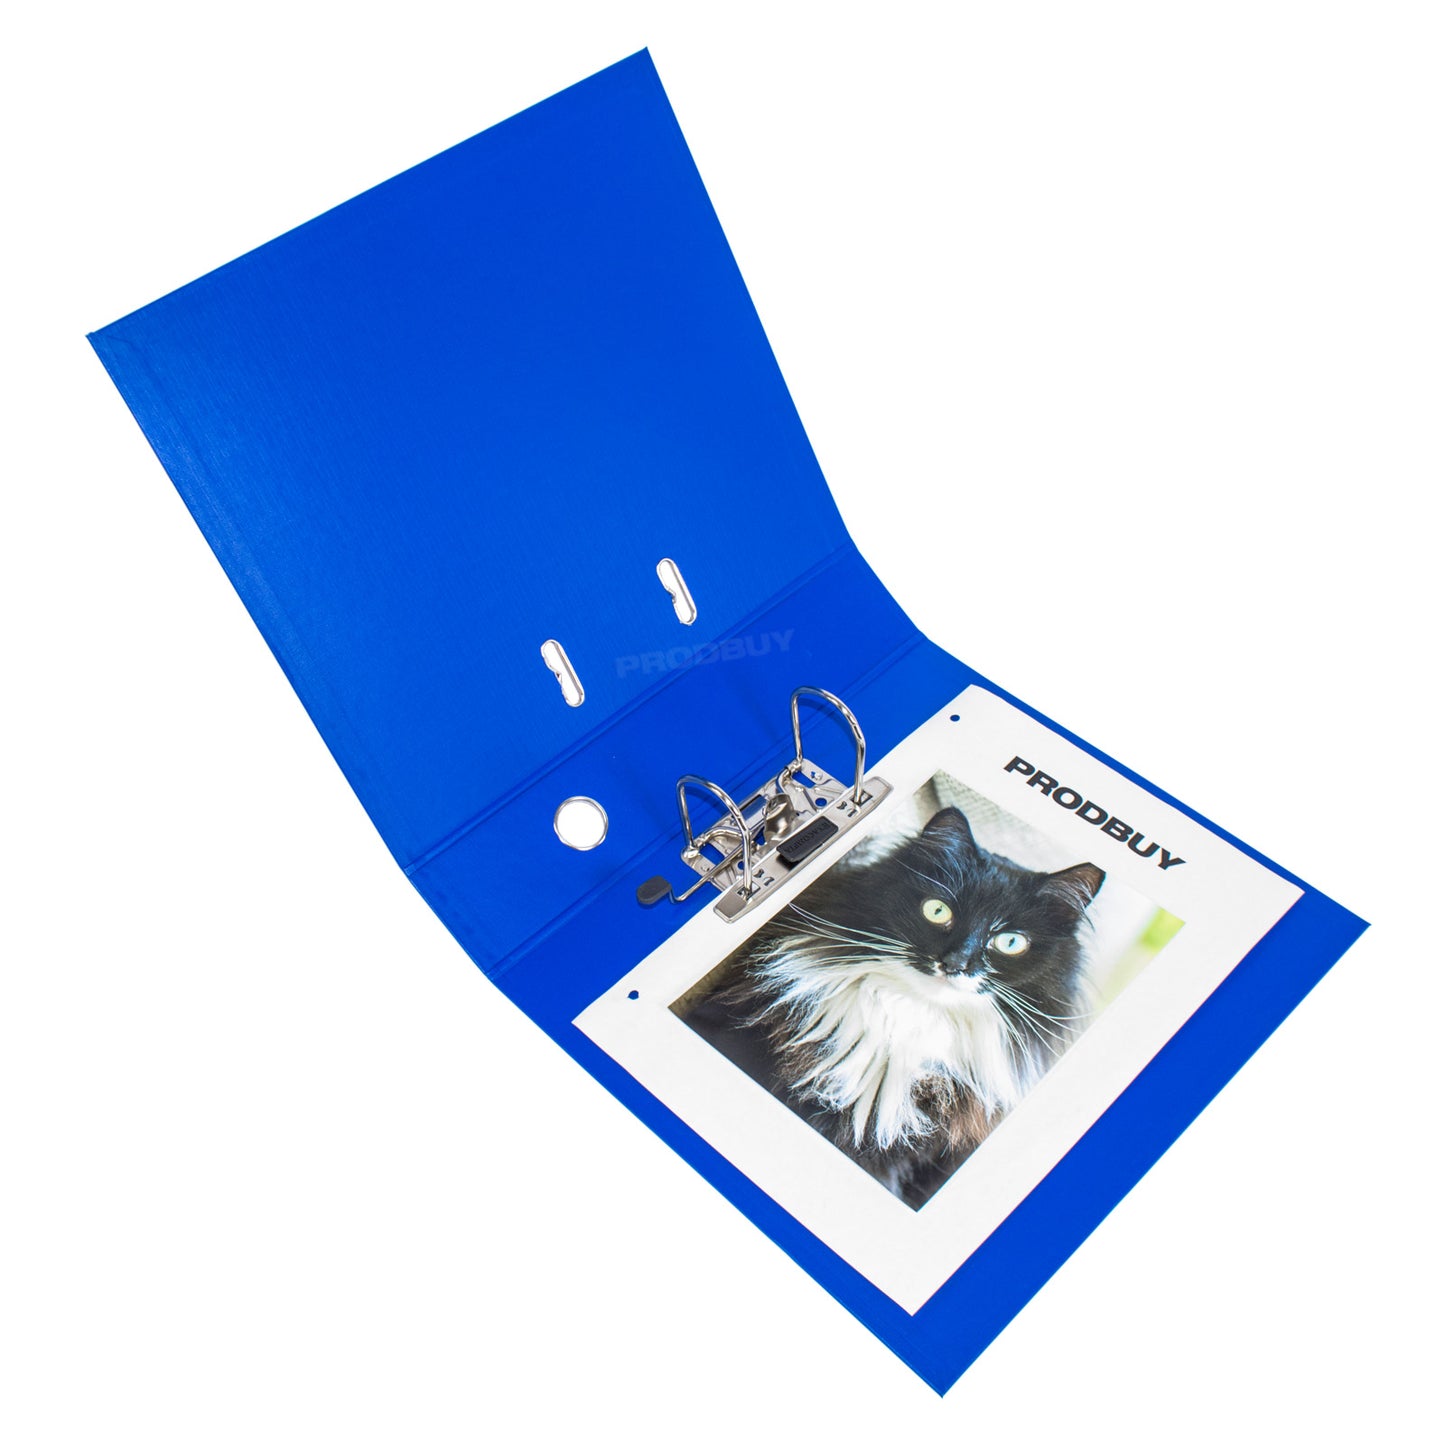 Set of 3 Lever Arch Files A4 70mm PVC with Dark Blue Colour